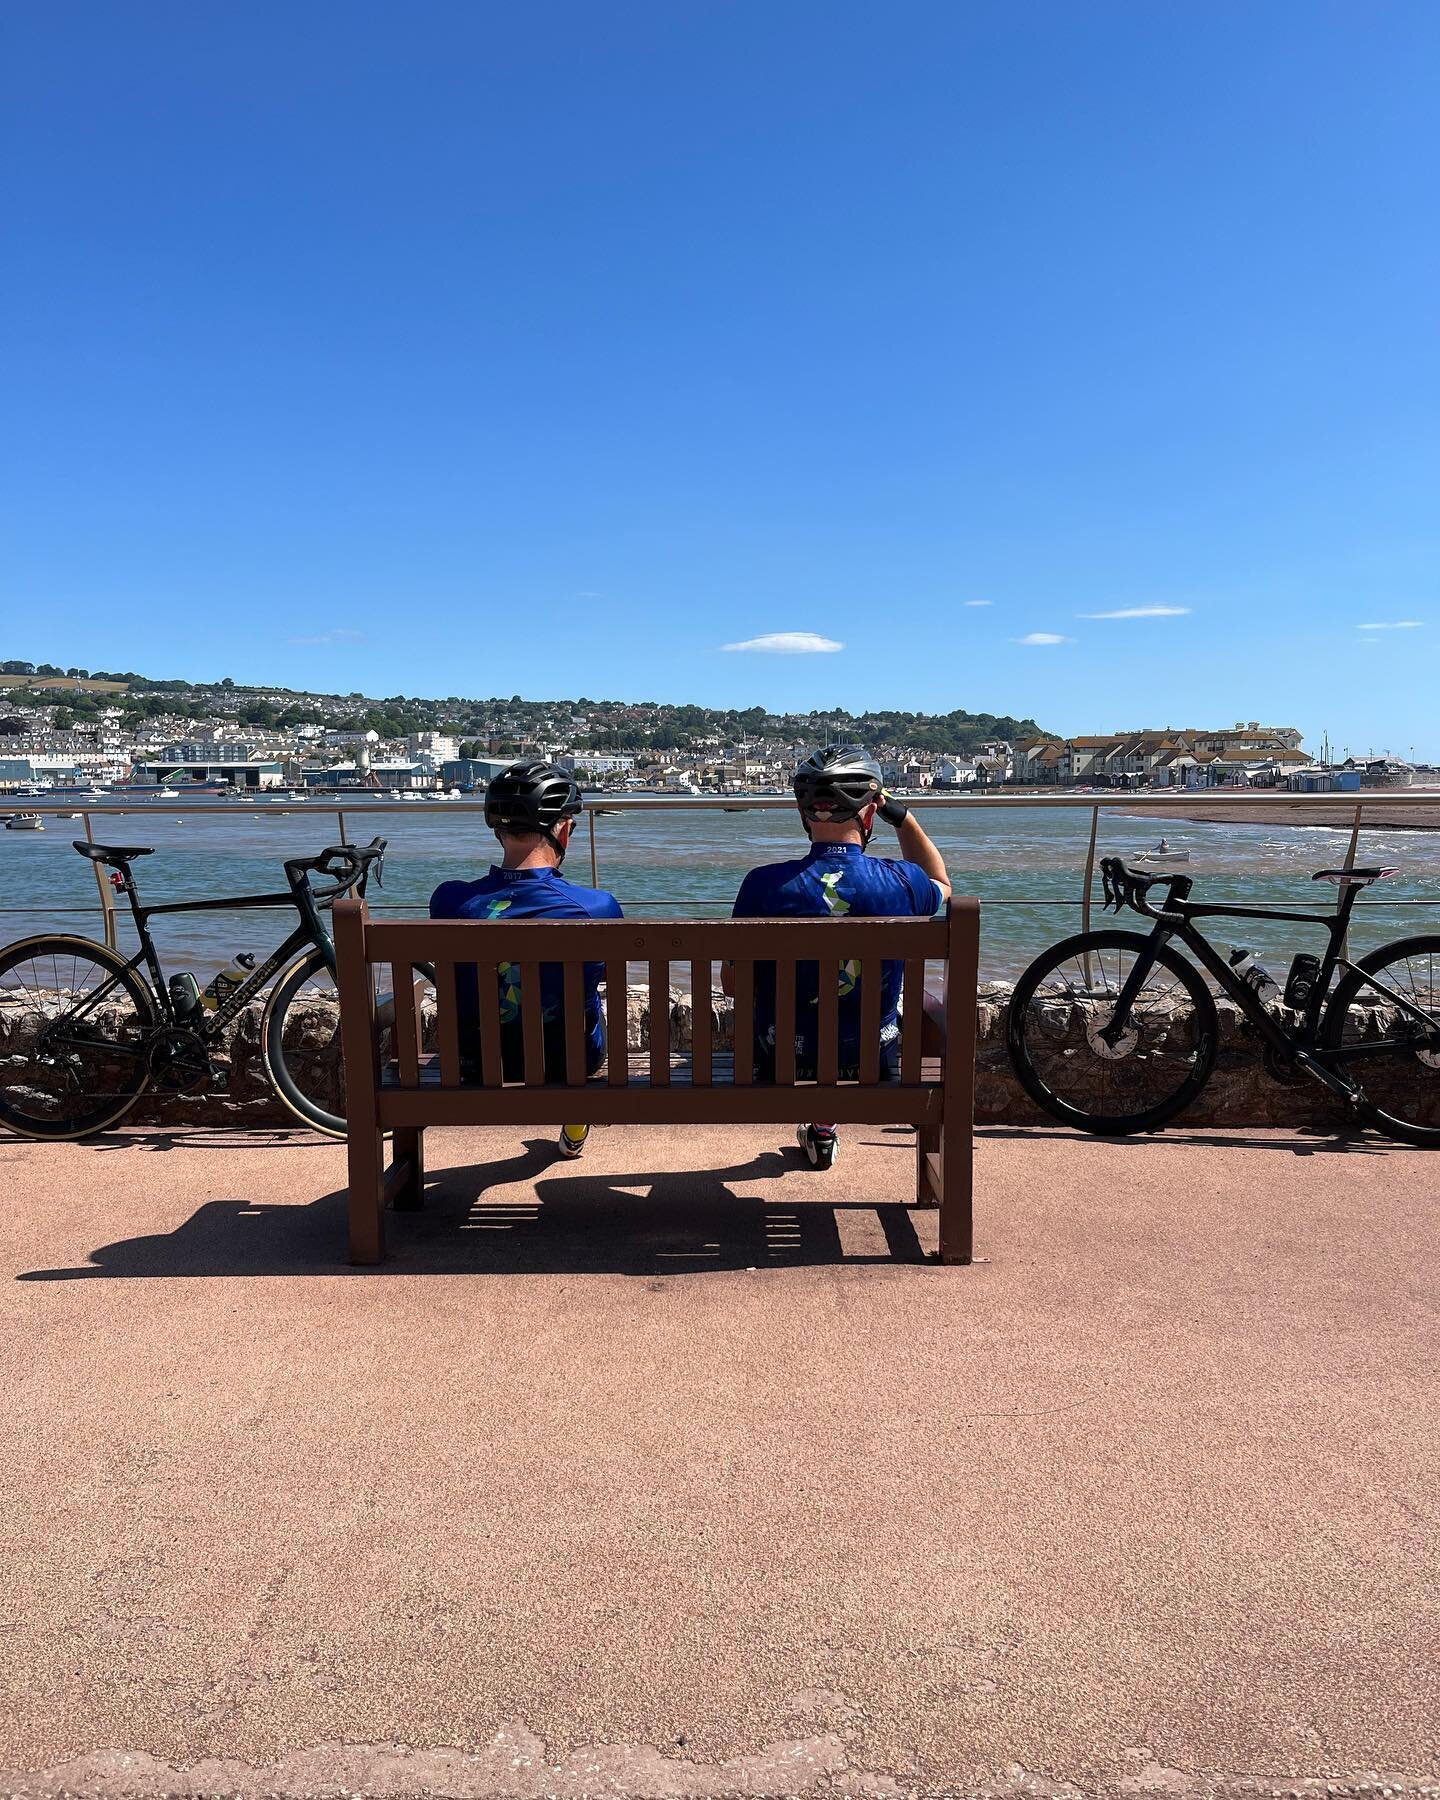 Rest and recovery, Steve and Perry enjoying the view in Shaldon post the Dartmoor Classic. 

#recoveryride #roadcycling #cyclists